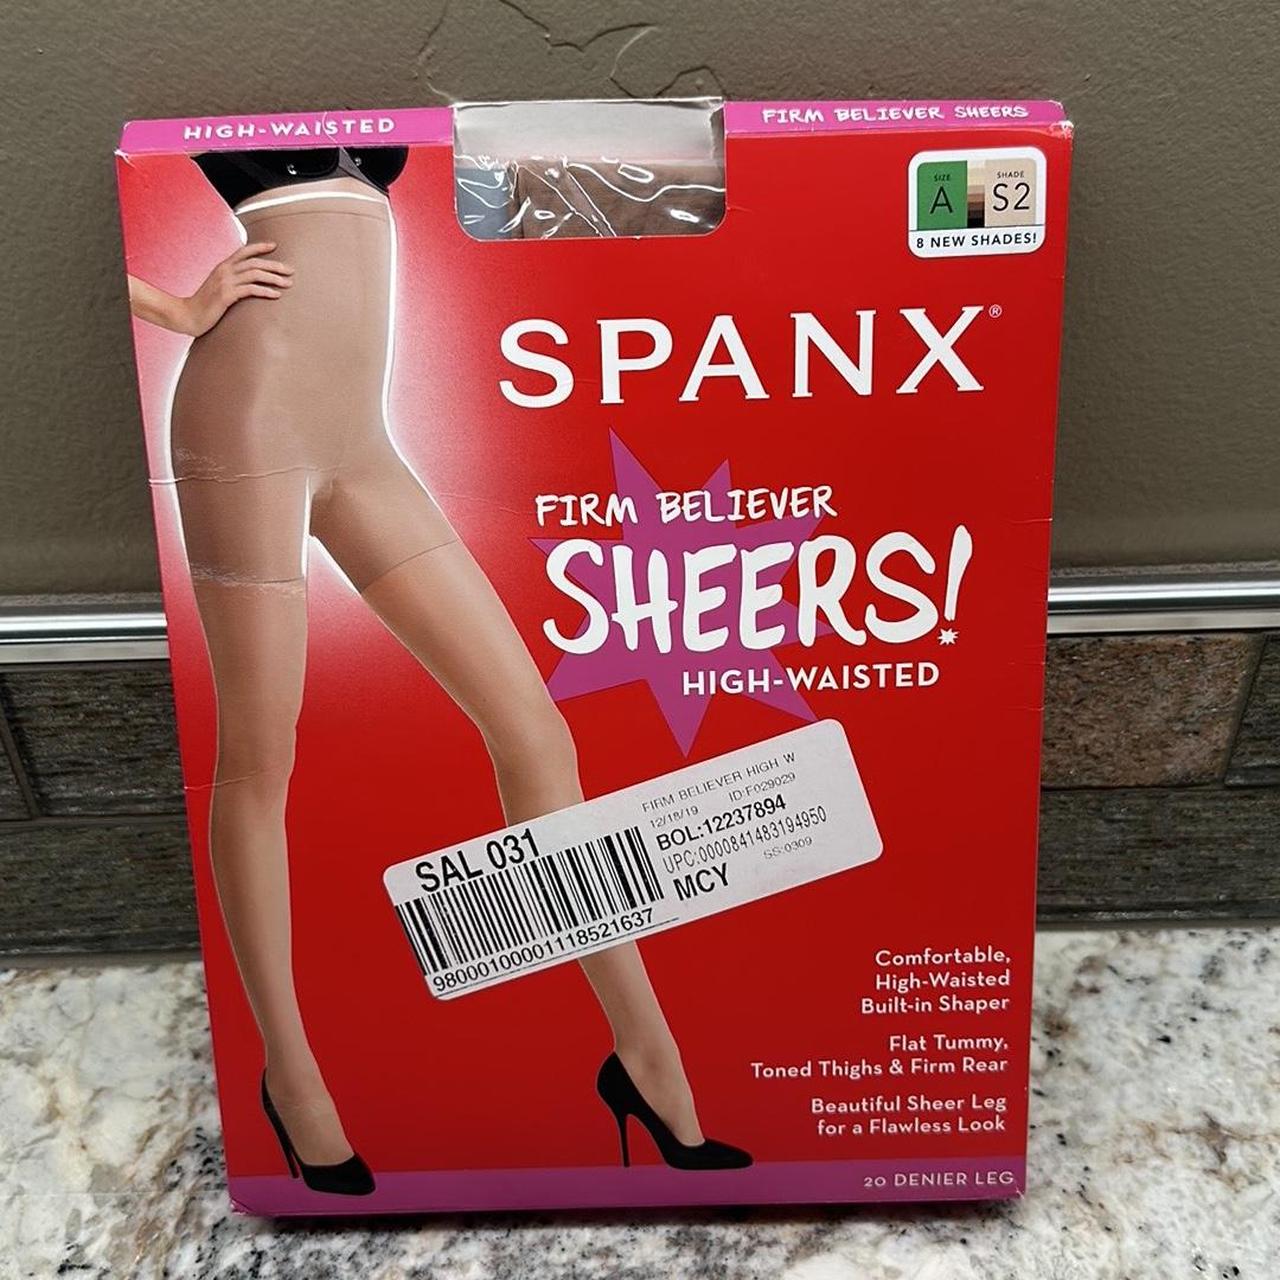 SPANX Firm Believer Shaping Sheers Pantyhose size A - Depop